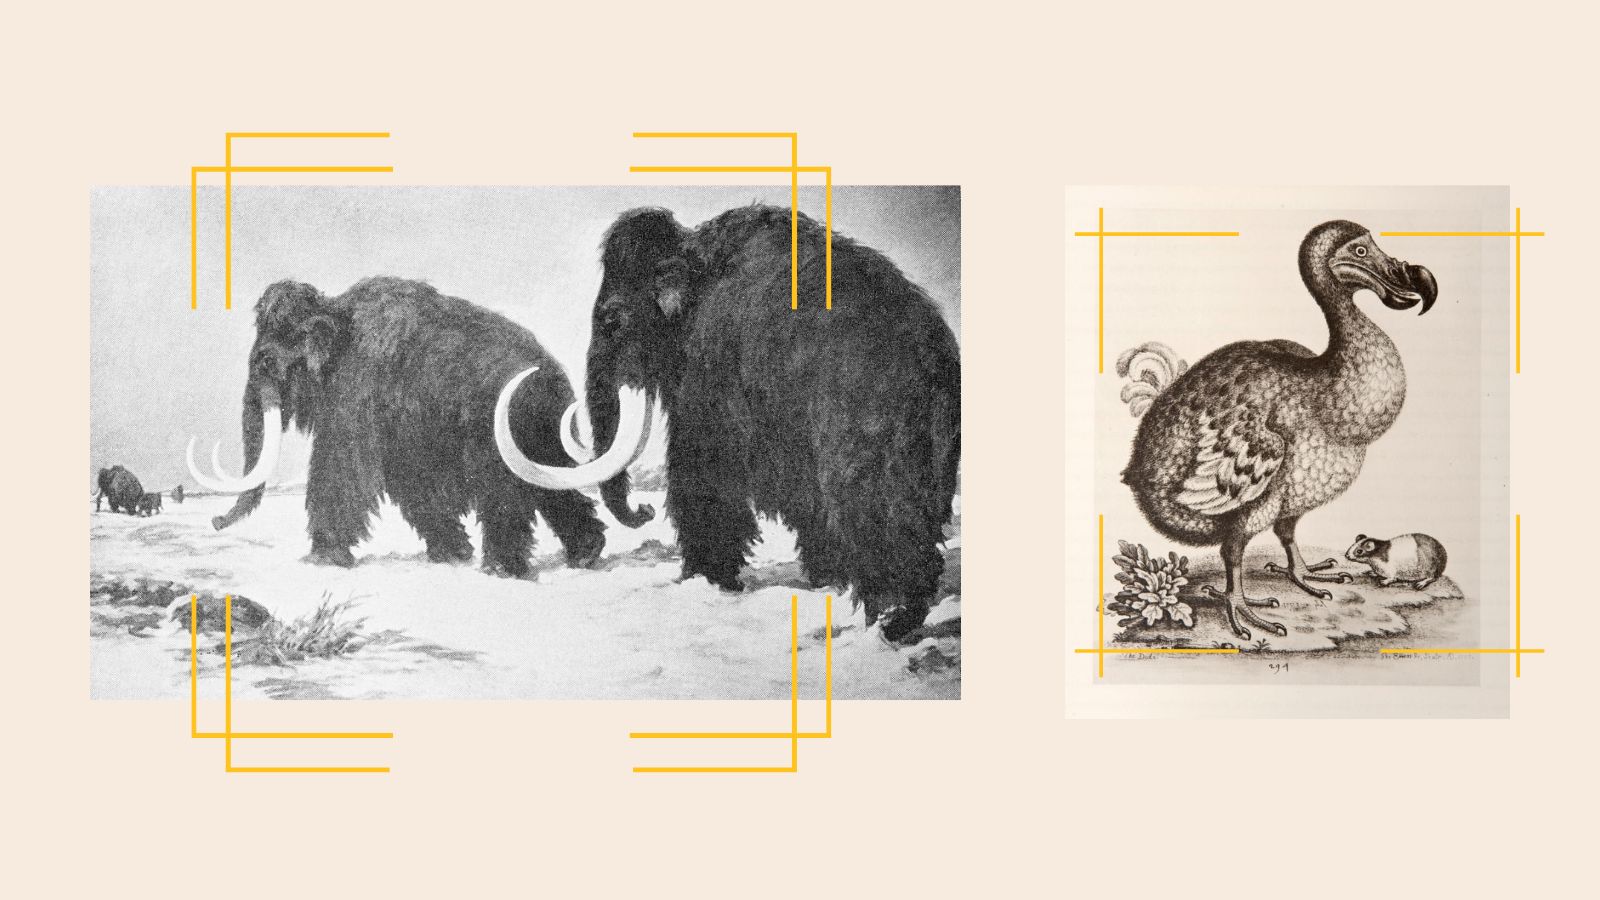 illustrations of wooly mammoths and a dodo bird